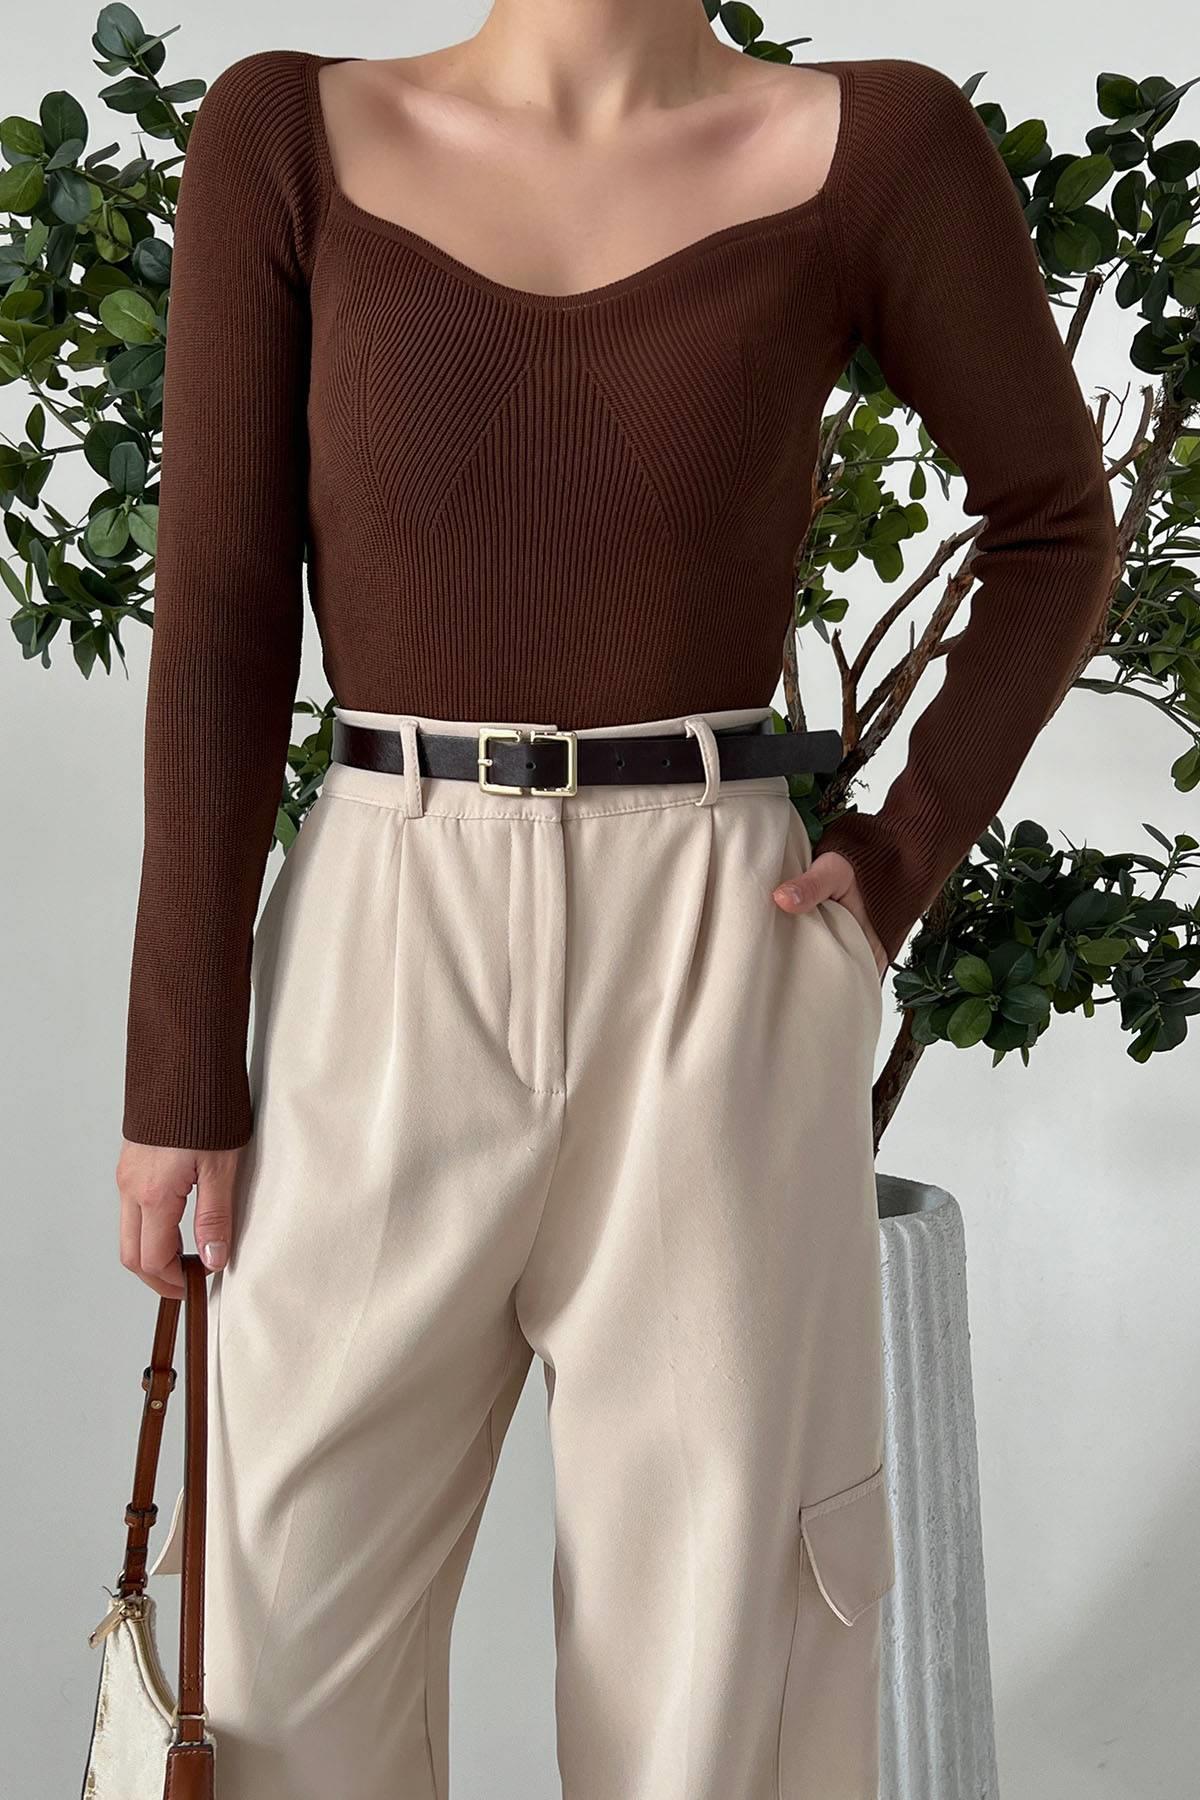 A model wears QUS11601 - Chest Collar Body - Bitter Brown, wholesale Blouse of Qustyle to display at Lonca